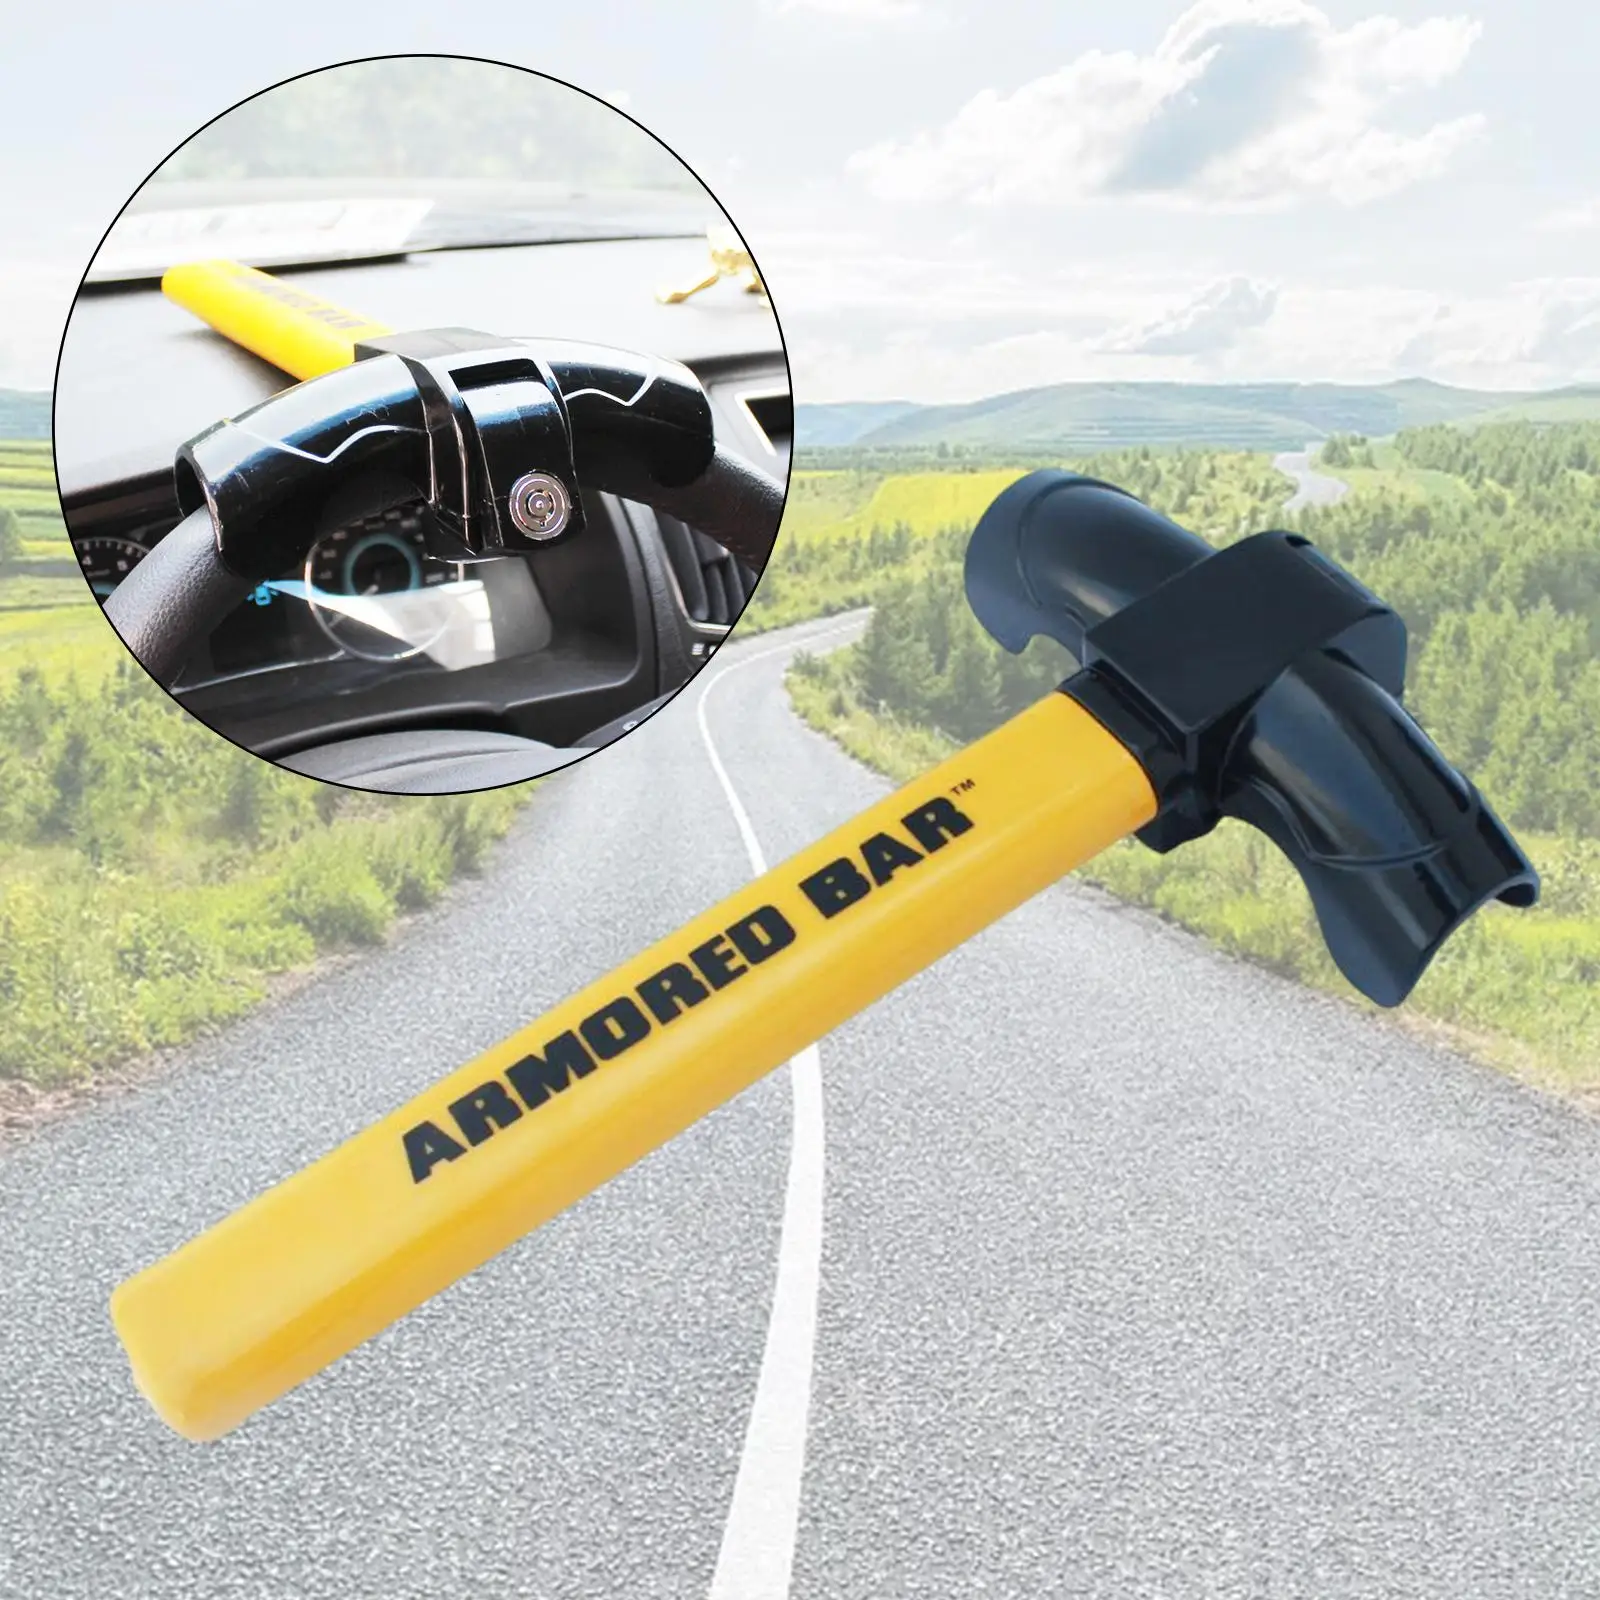 Auto Steering Wheel Lock with 2 Keys Anti Theft Durable Heavy Duty Security Lock Stainless Steel T Shaped for Van SUV Cars